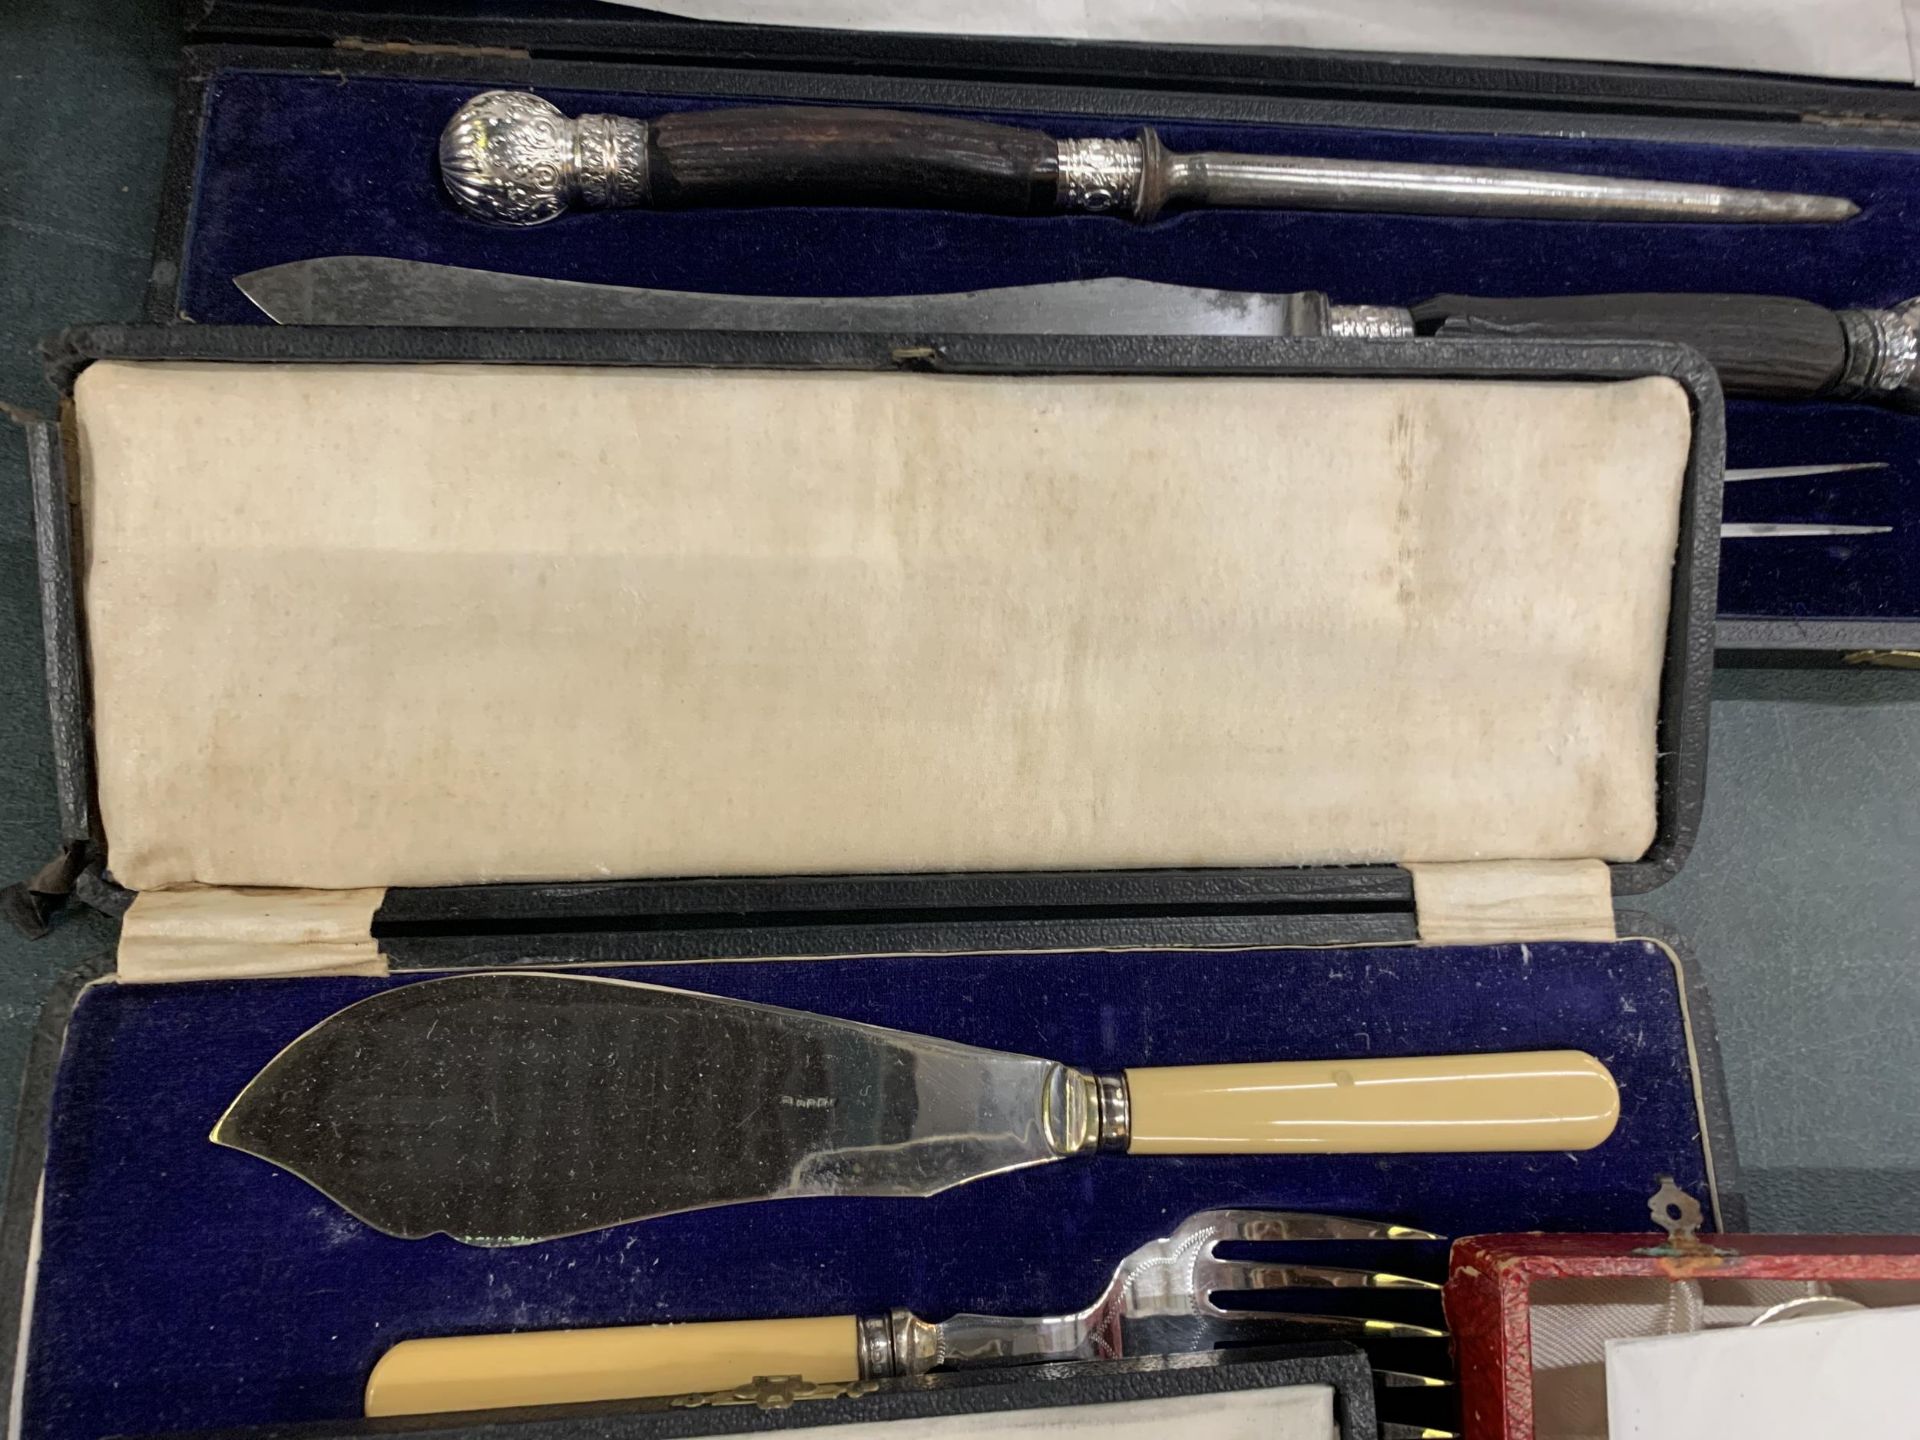 FOUR VINTAGE BOXES OF FLATWARE TO INCLUDE A CARVING SET, FISH SERVING SET, TEASPOONS WITH SUGAR - Image 2 of 3